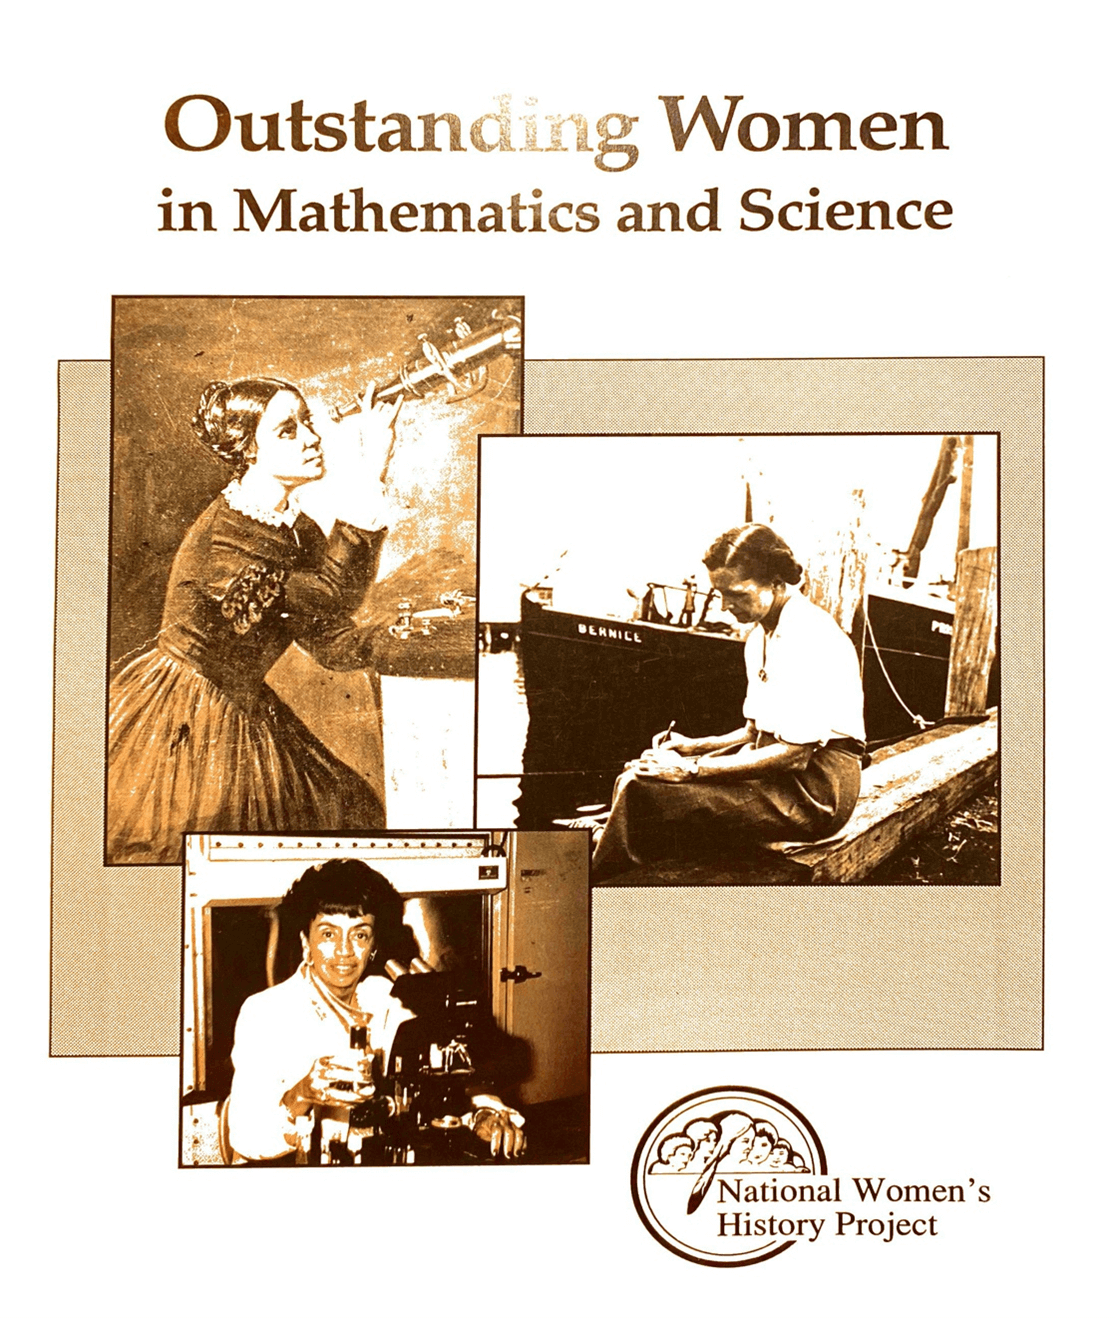 Figure 1: Cover of the National Women's History Project Display Set